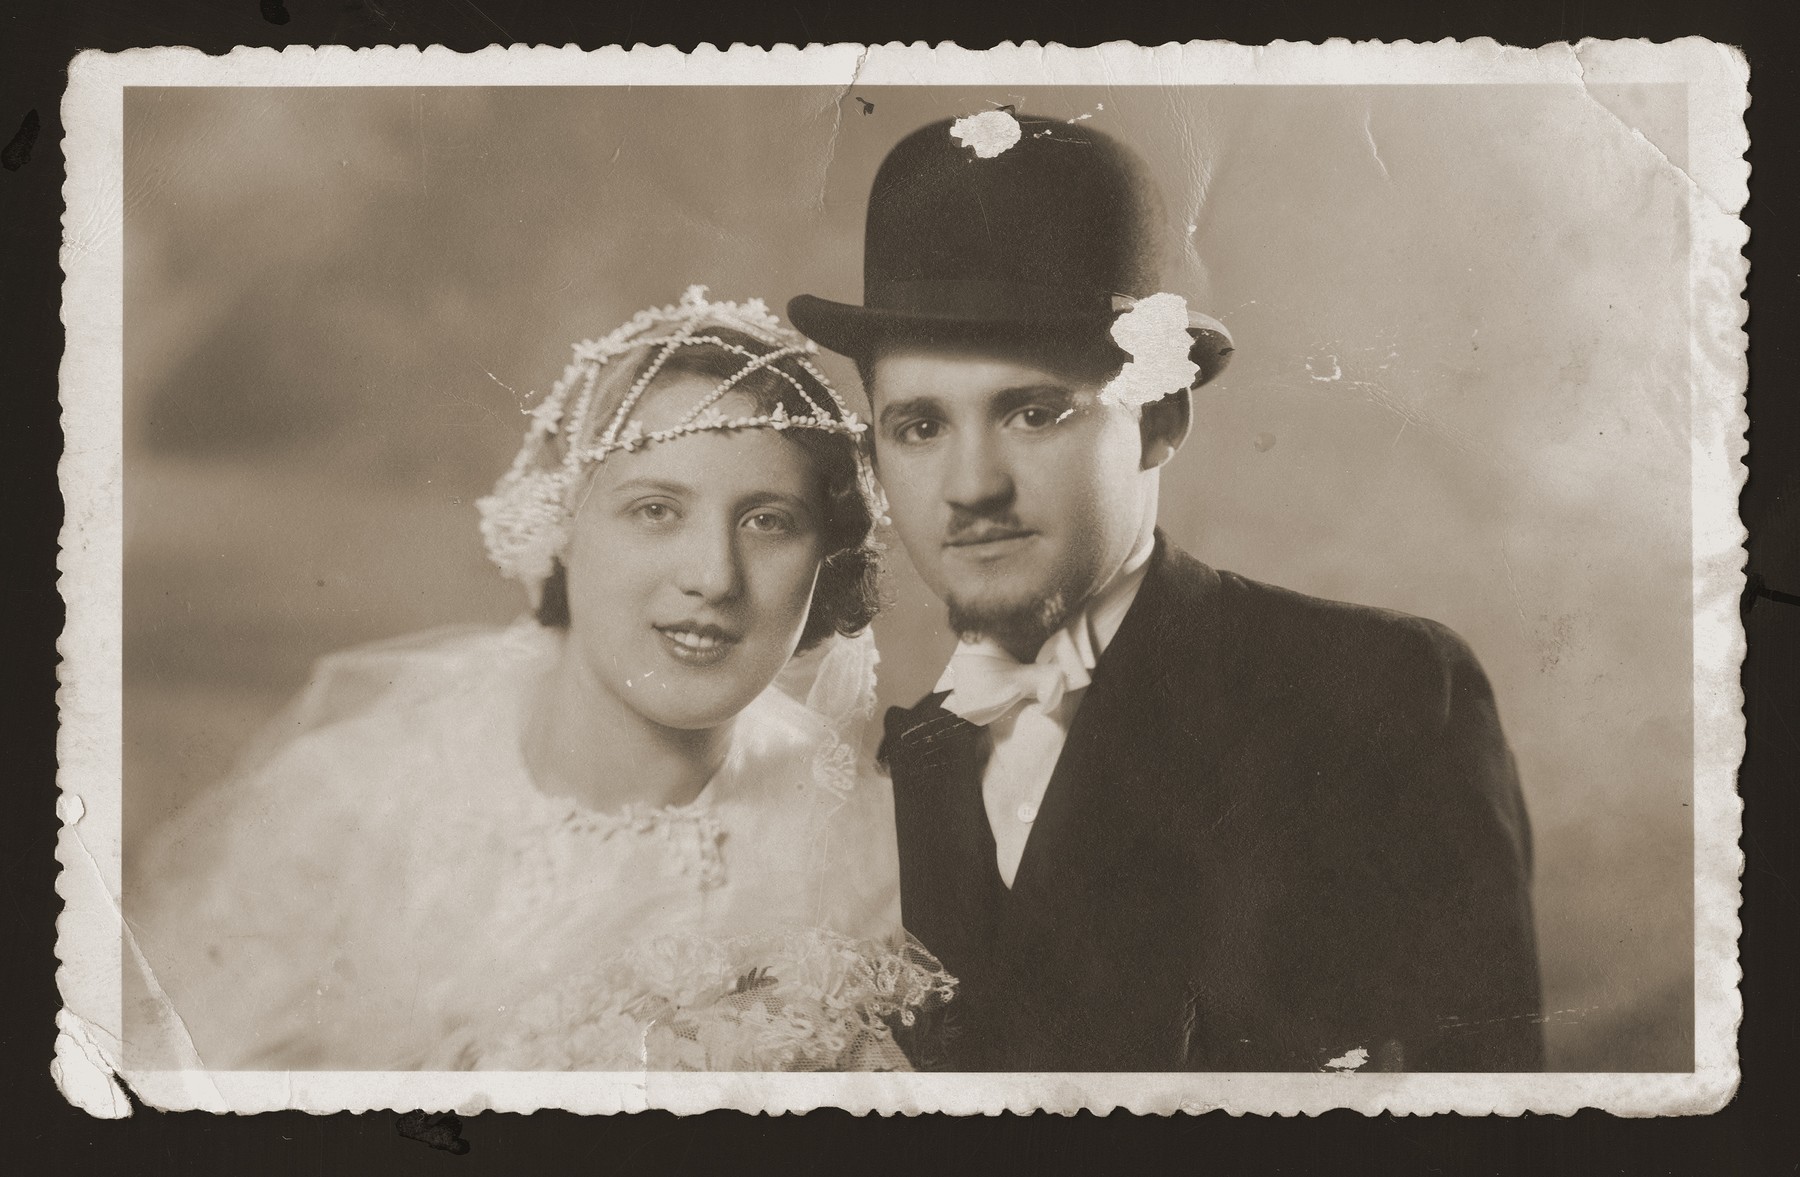 Wedding portrait of Gabor and Tubi (Goldstein) Berkovic.   He served as a cantor, originally as his brother-in-law's assistant.  Their two sons, Emil and Eddie, both became cantors as well. The family survived the Holocaust hiding in a farm near Senica.